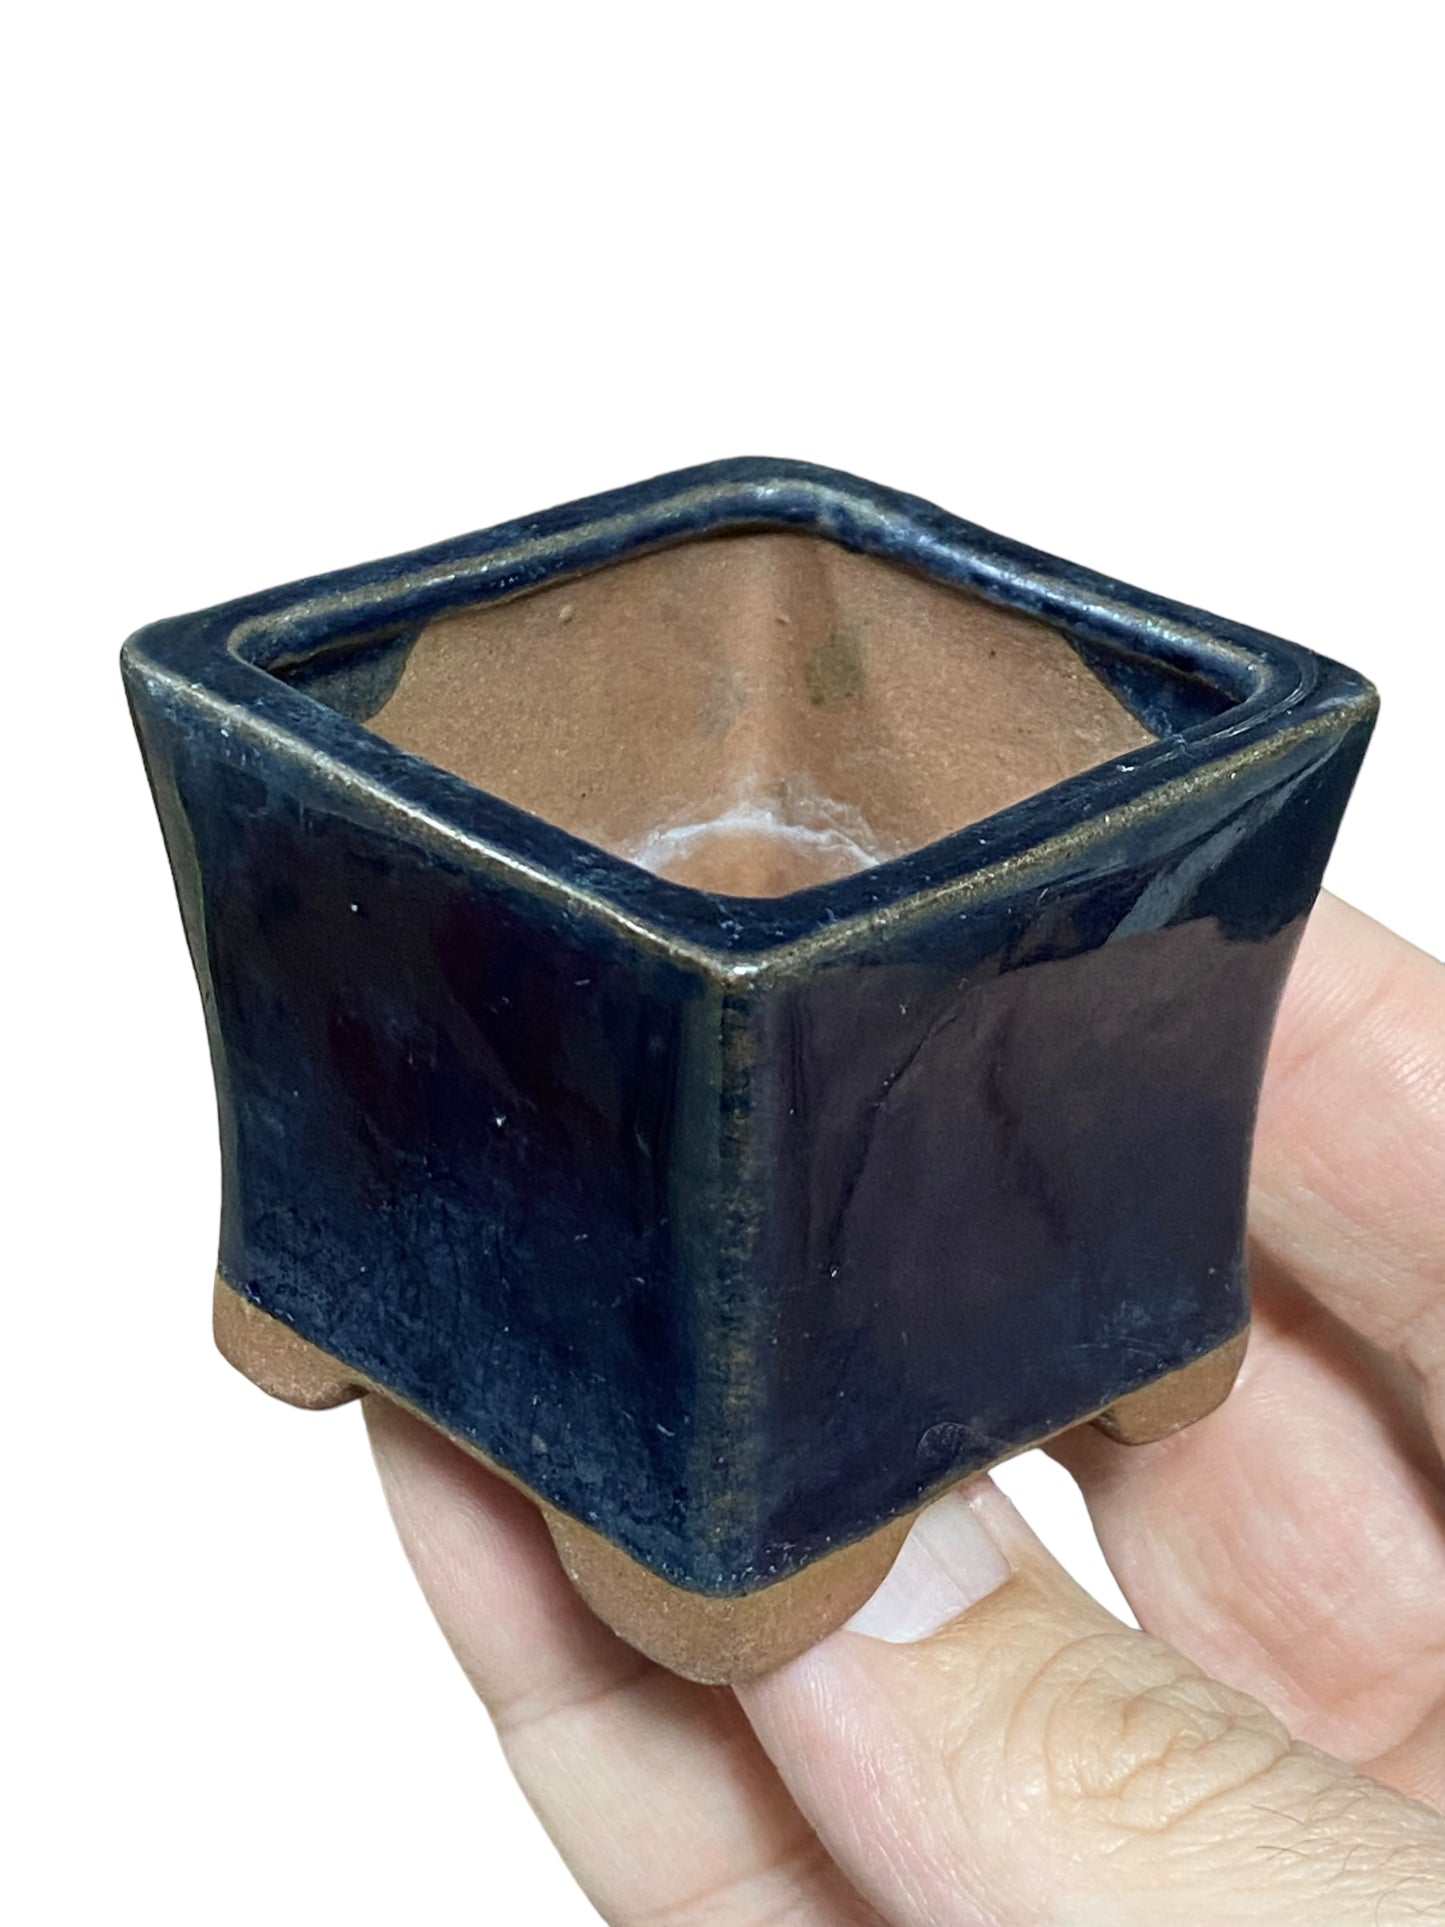 Mame / Tiny Bonsai or Accent Pot from Japan